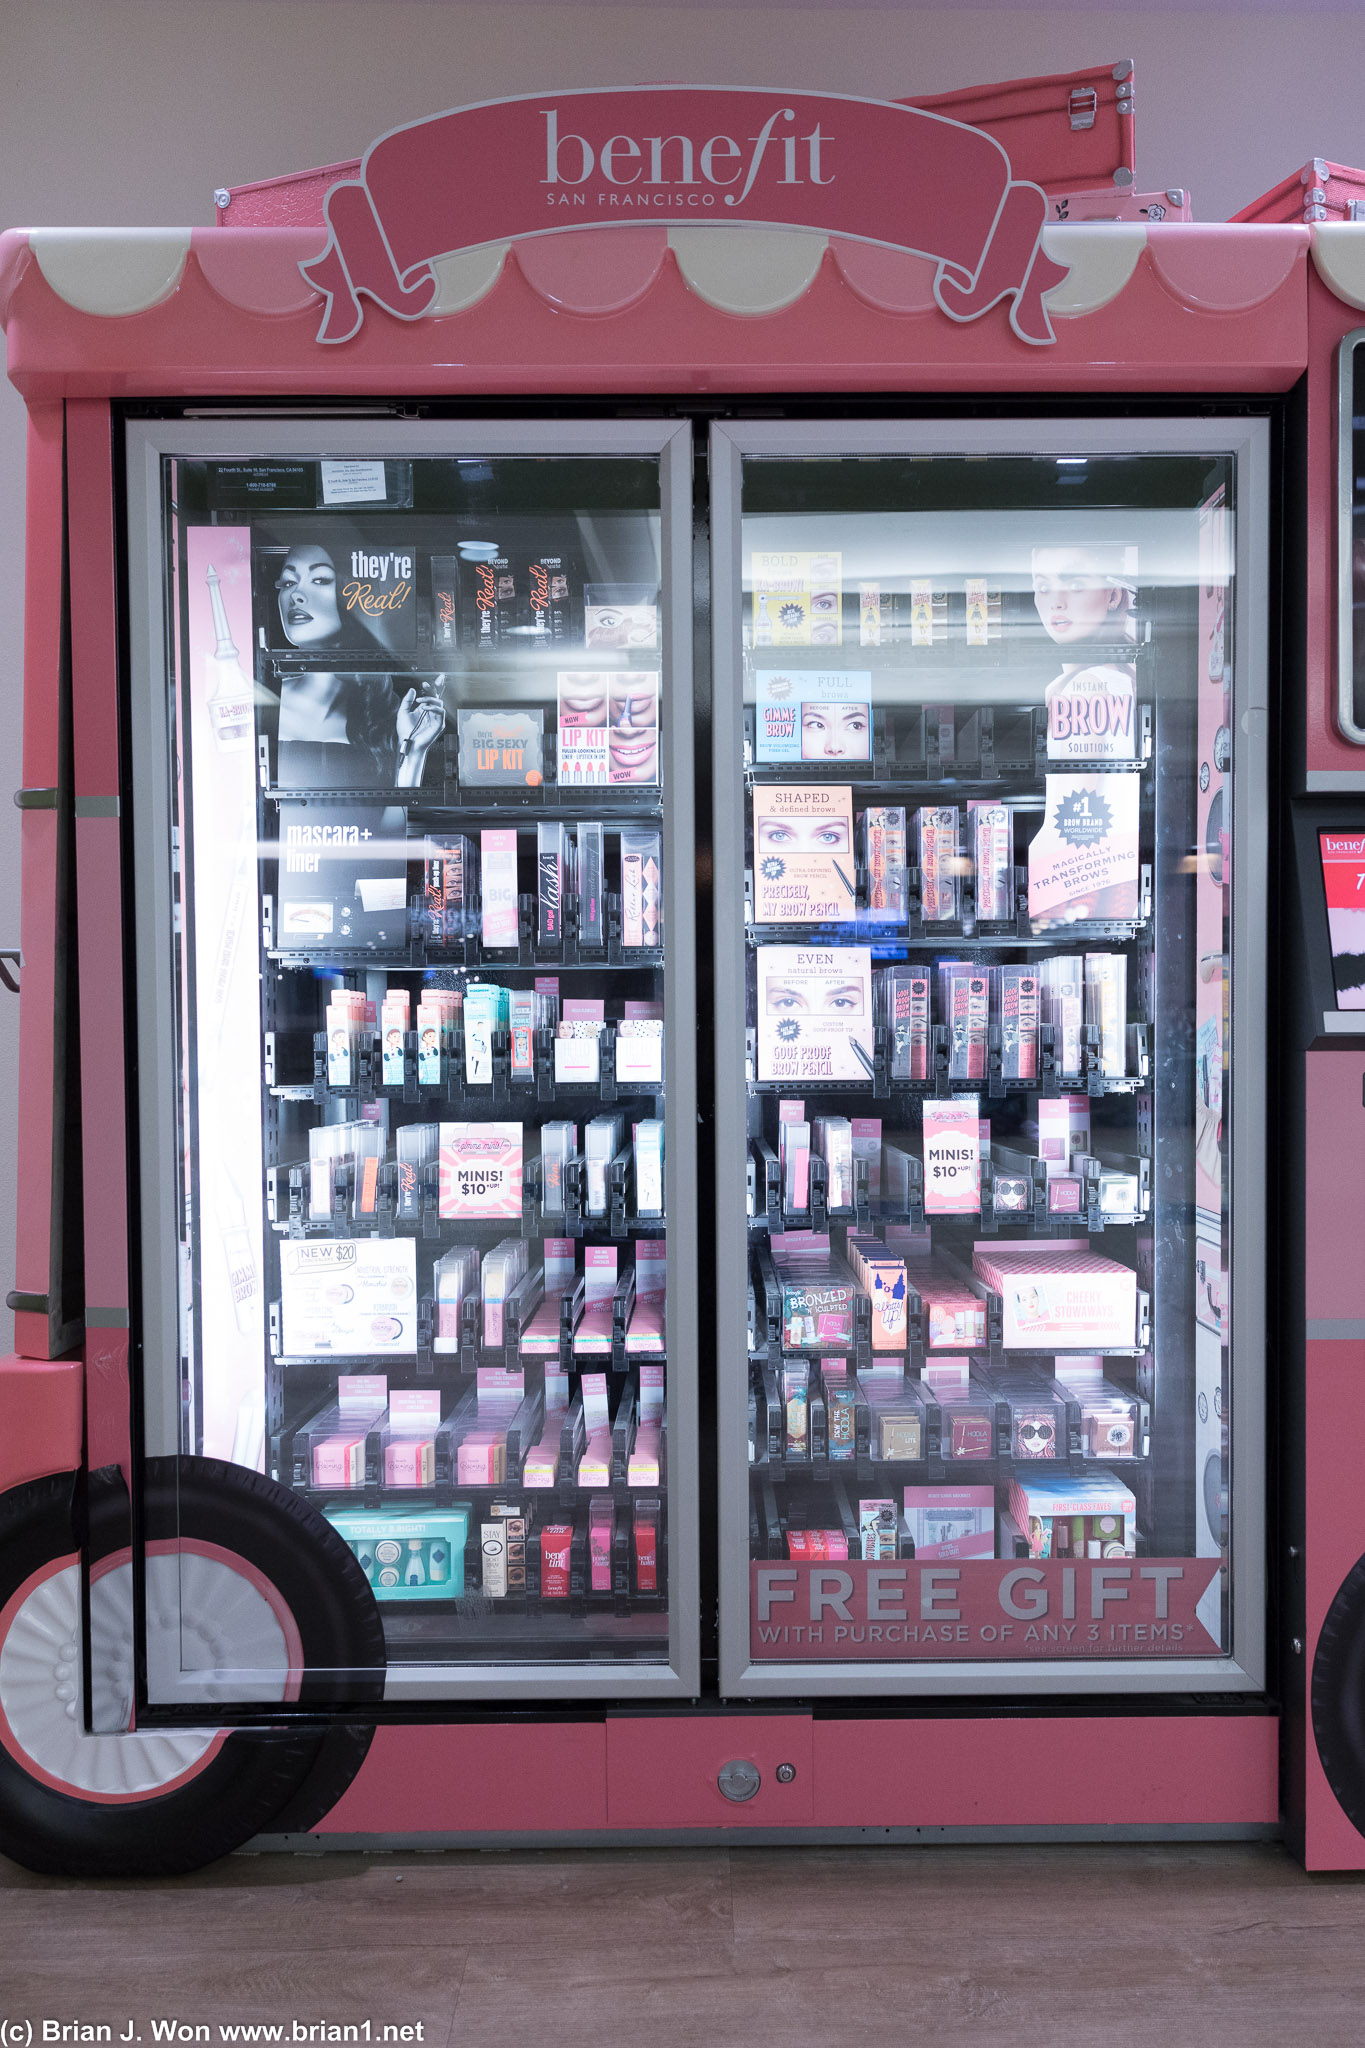 This is a ... wha?? A vending machine for makeup? At SMF of all places?